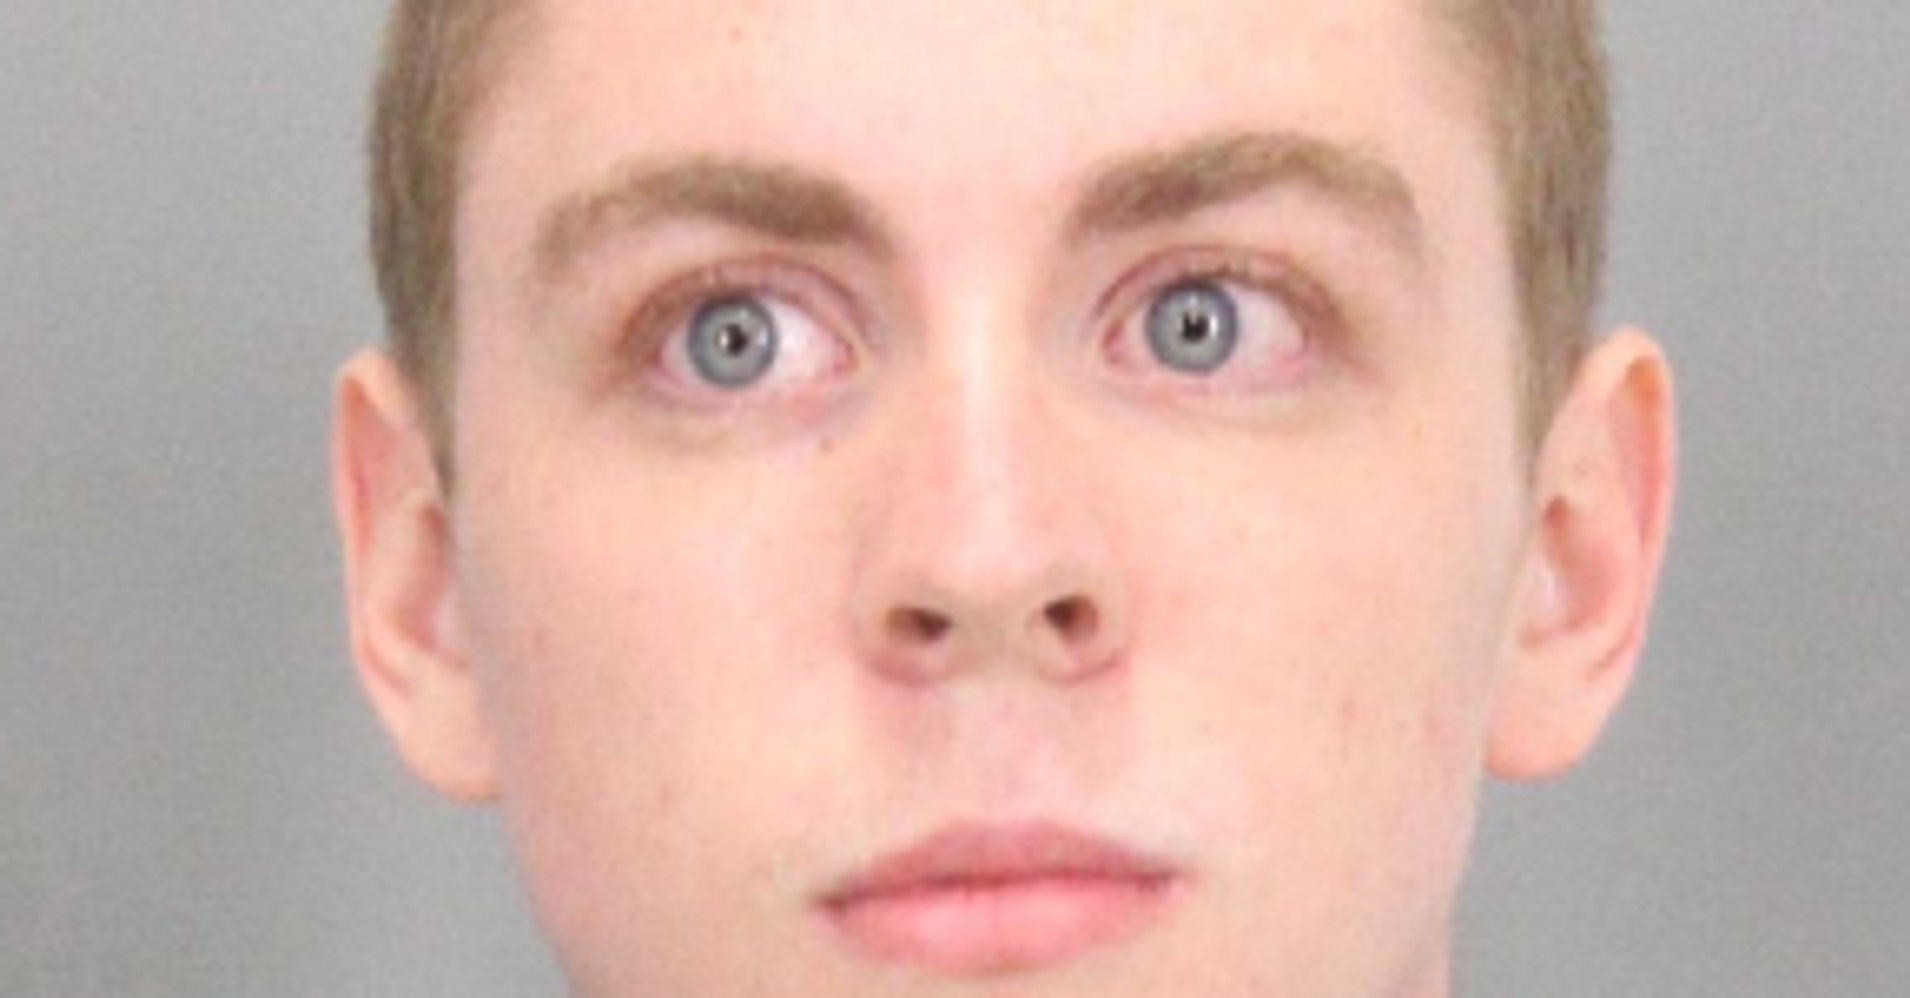 If Not For 2 Strangers Brock Turner May Have Never Been Arrested